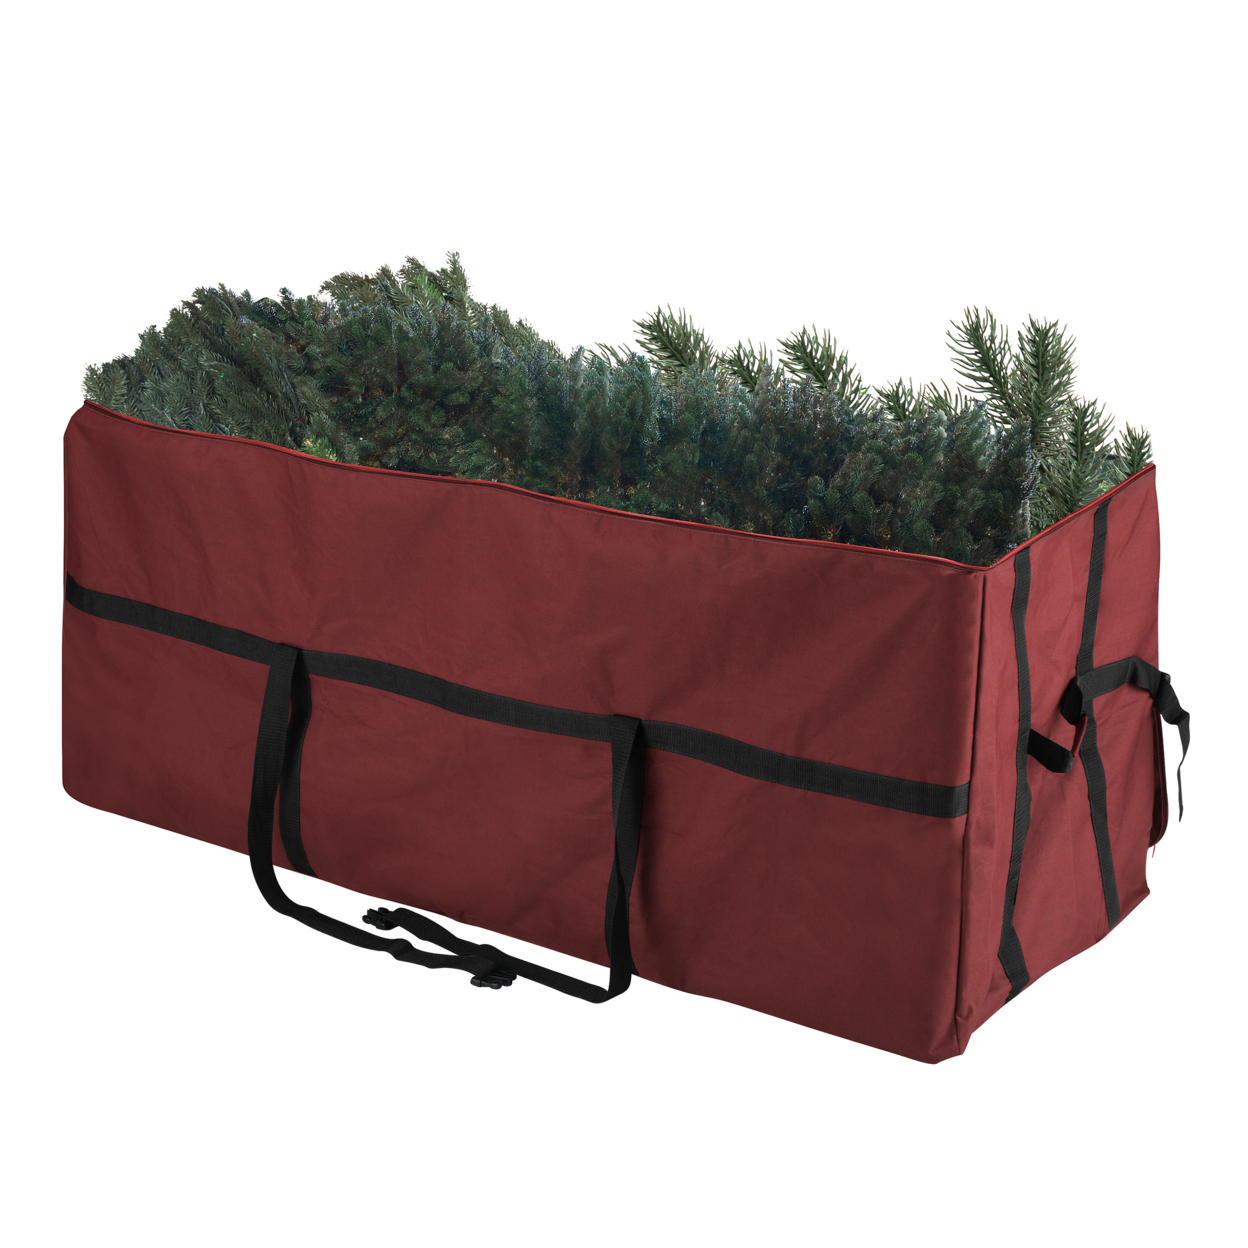 Elf Stor Red Holiday Christmas Tree Canvas Storage Bag Large For 7.5 Foot Tree